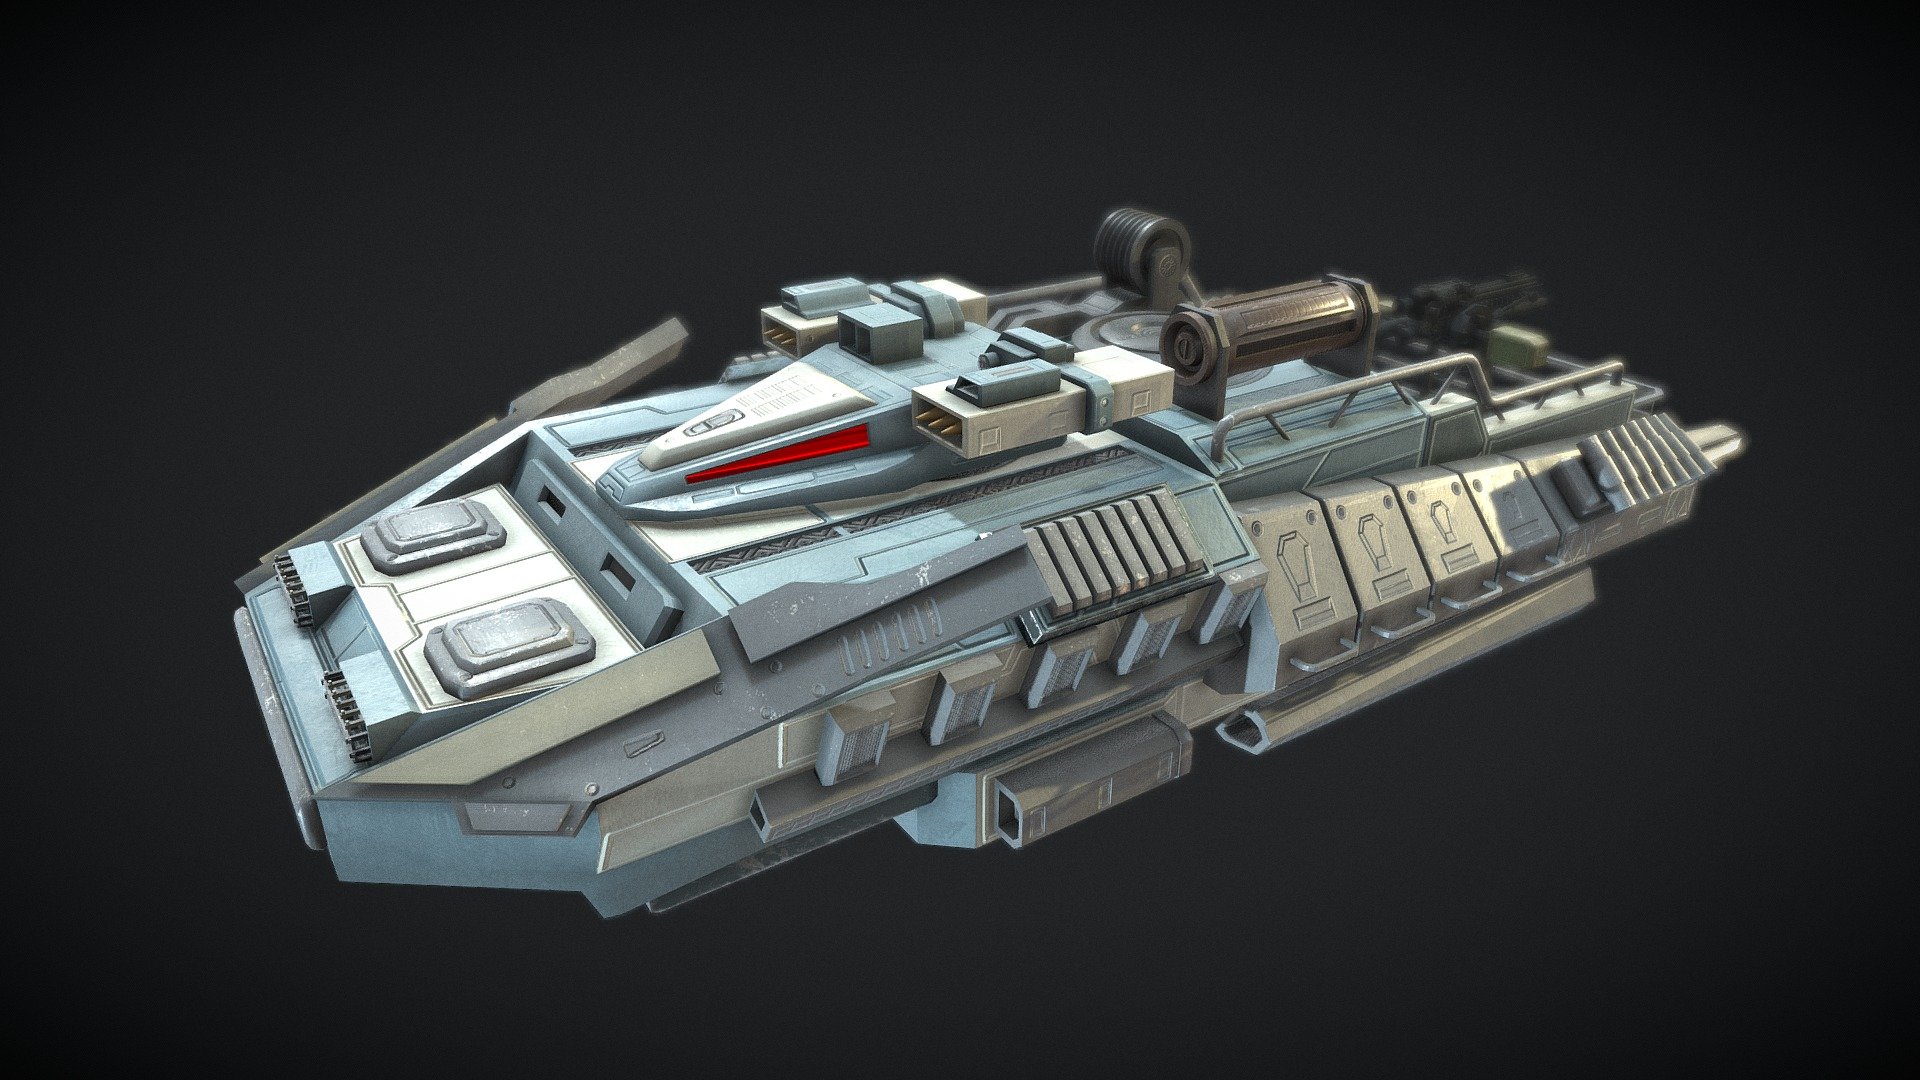 An original Sci-fi Hover Tank - Model/Art by Outworld Studios

Must give credit to Outworld Studios if using this asset

Show support by joining my discord: https://discord.gg/EgWSkp8Cxn - Sci-fi Hover Tank IFV - Buy Royalty Free 3D model by Outworld Studios (@outworldstudios) 3d model